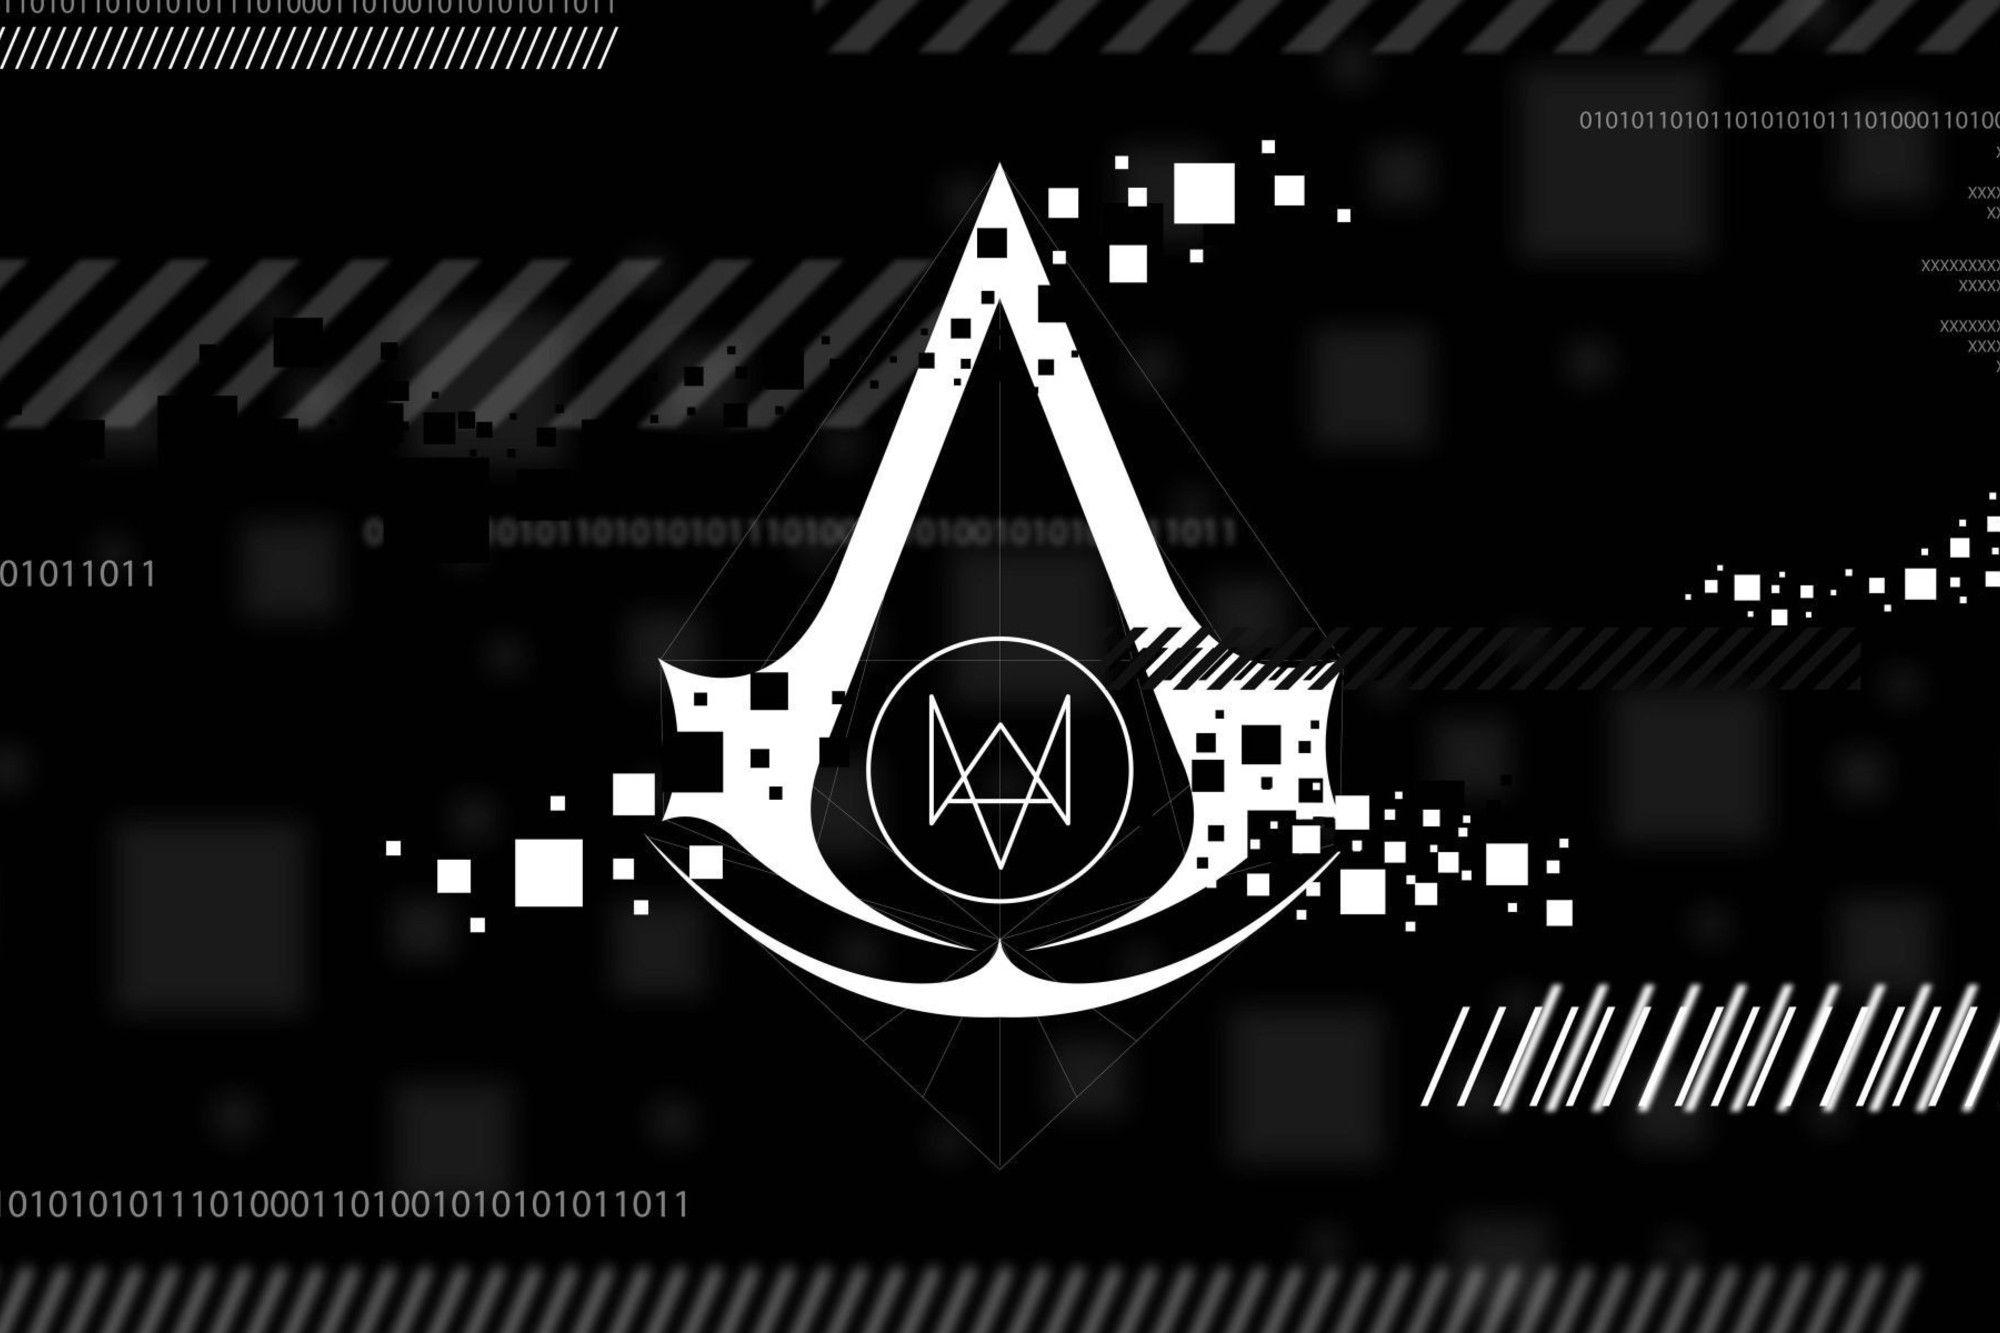 Watch Dogs 2 Minimal Wallpapers